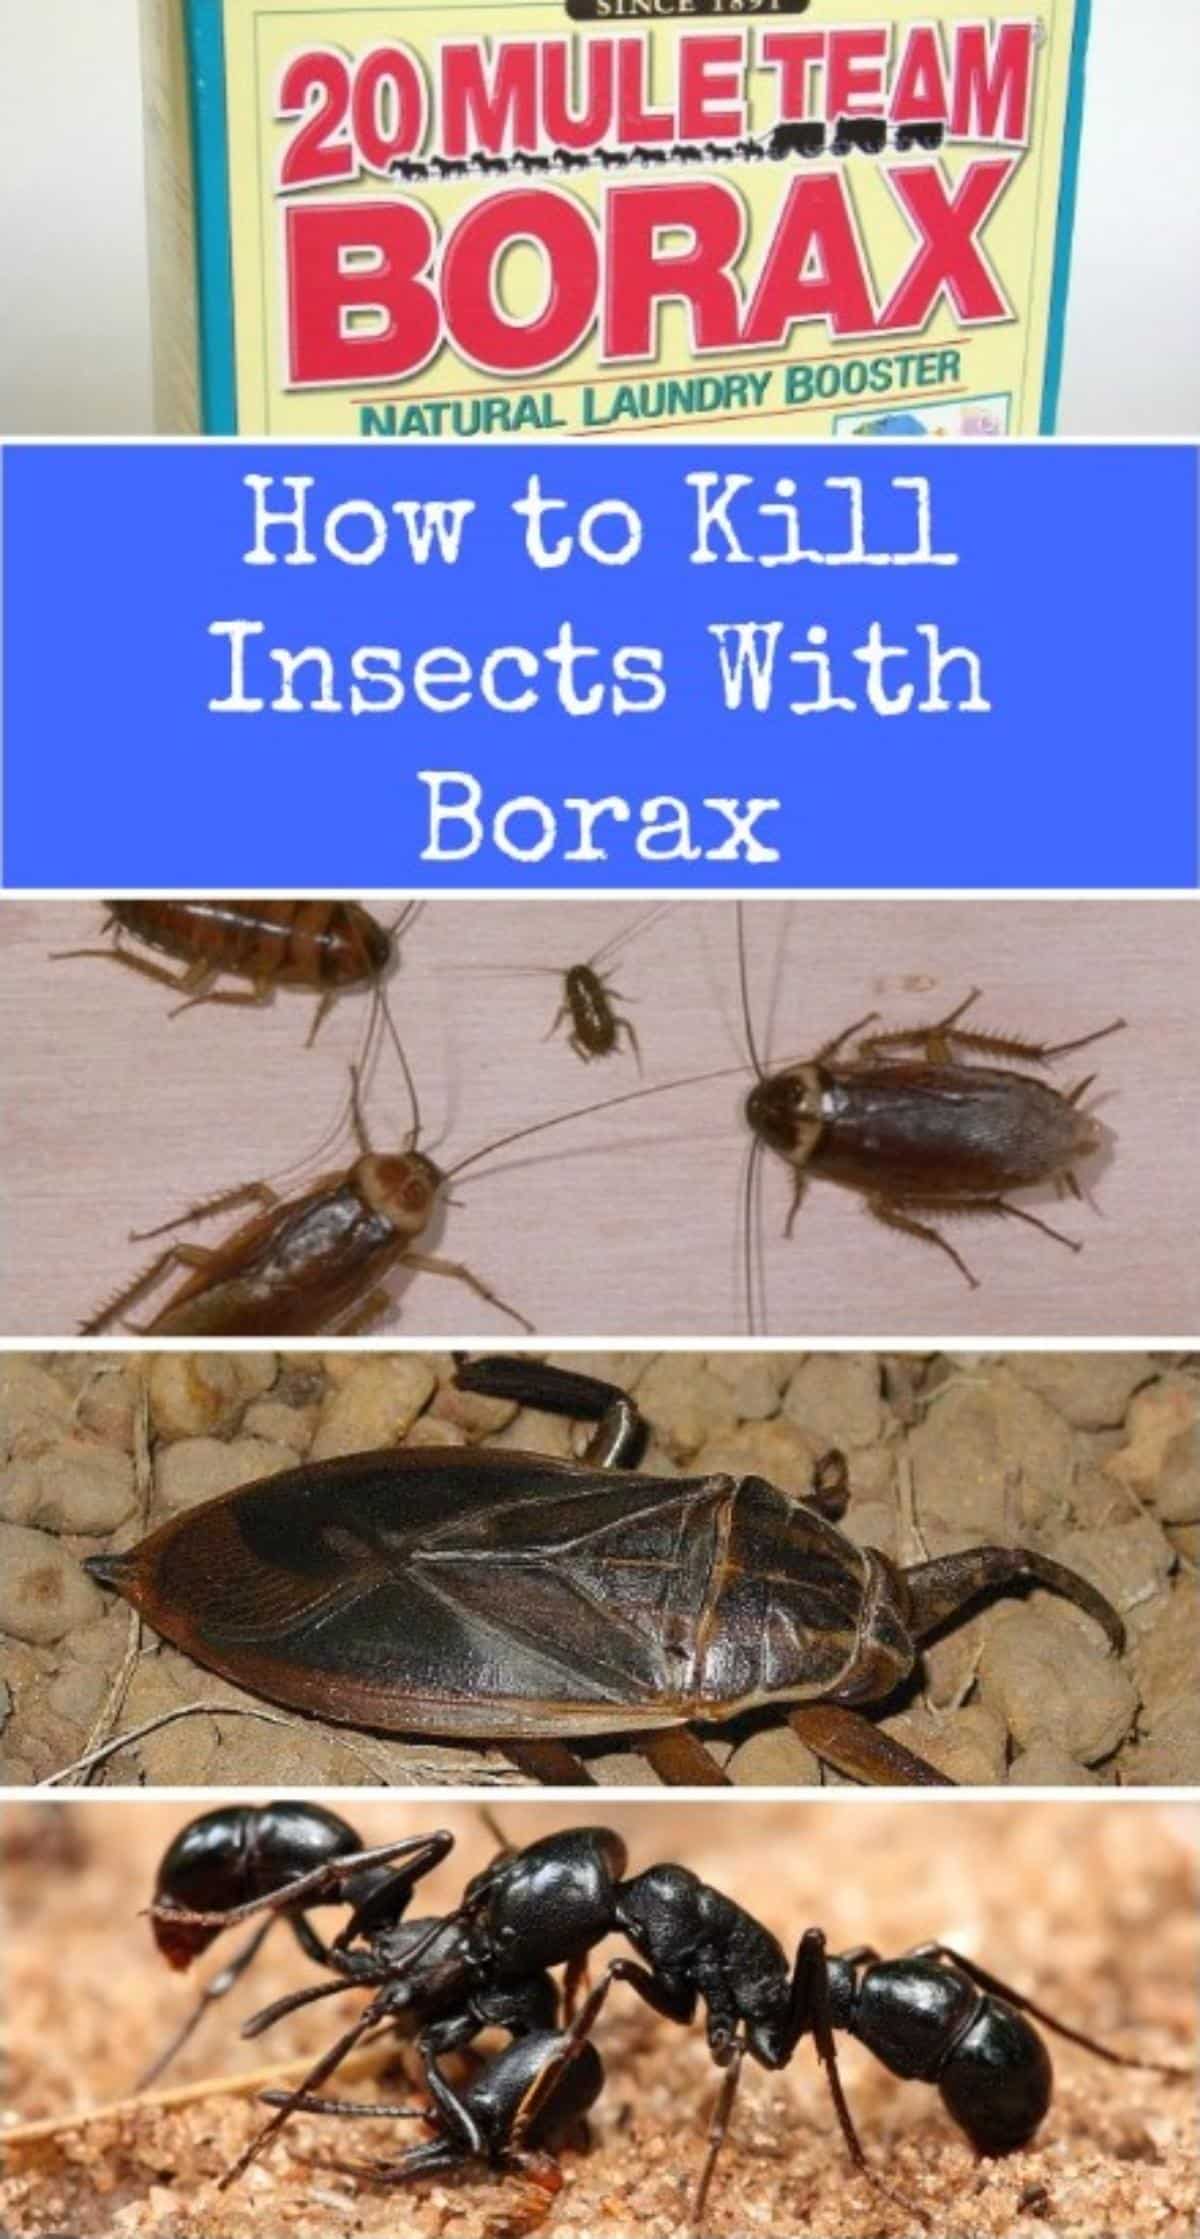 How to kill insects with borax collage.